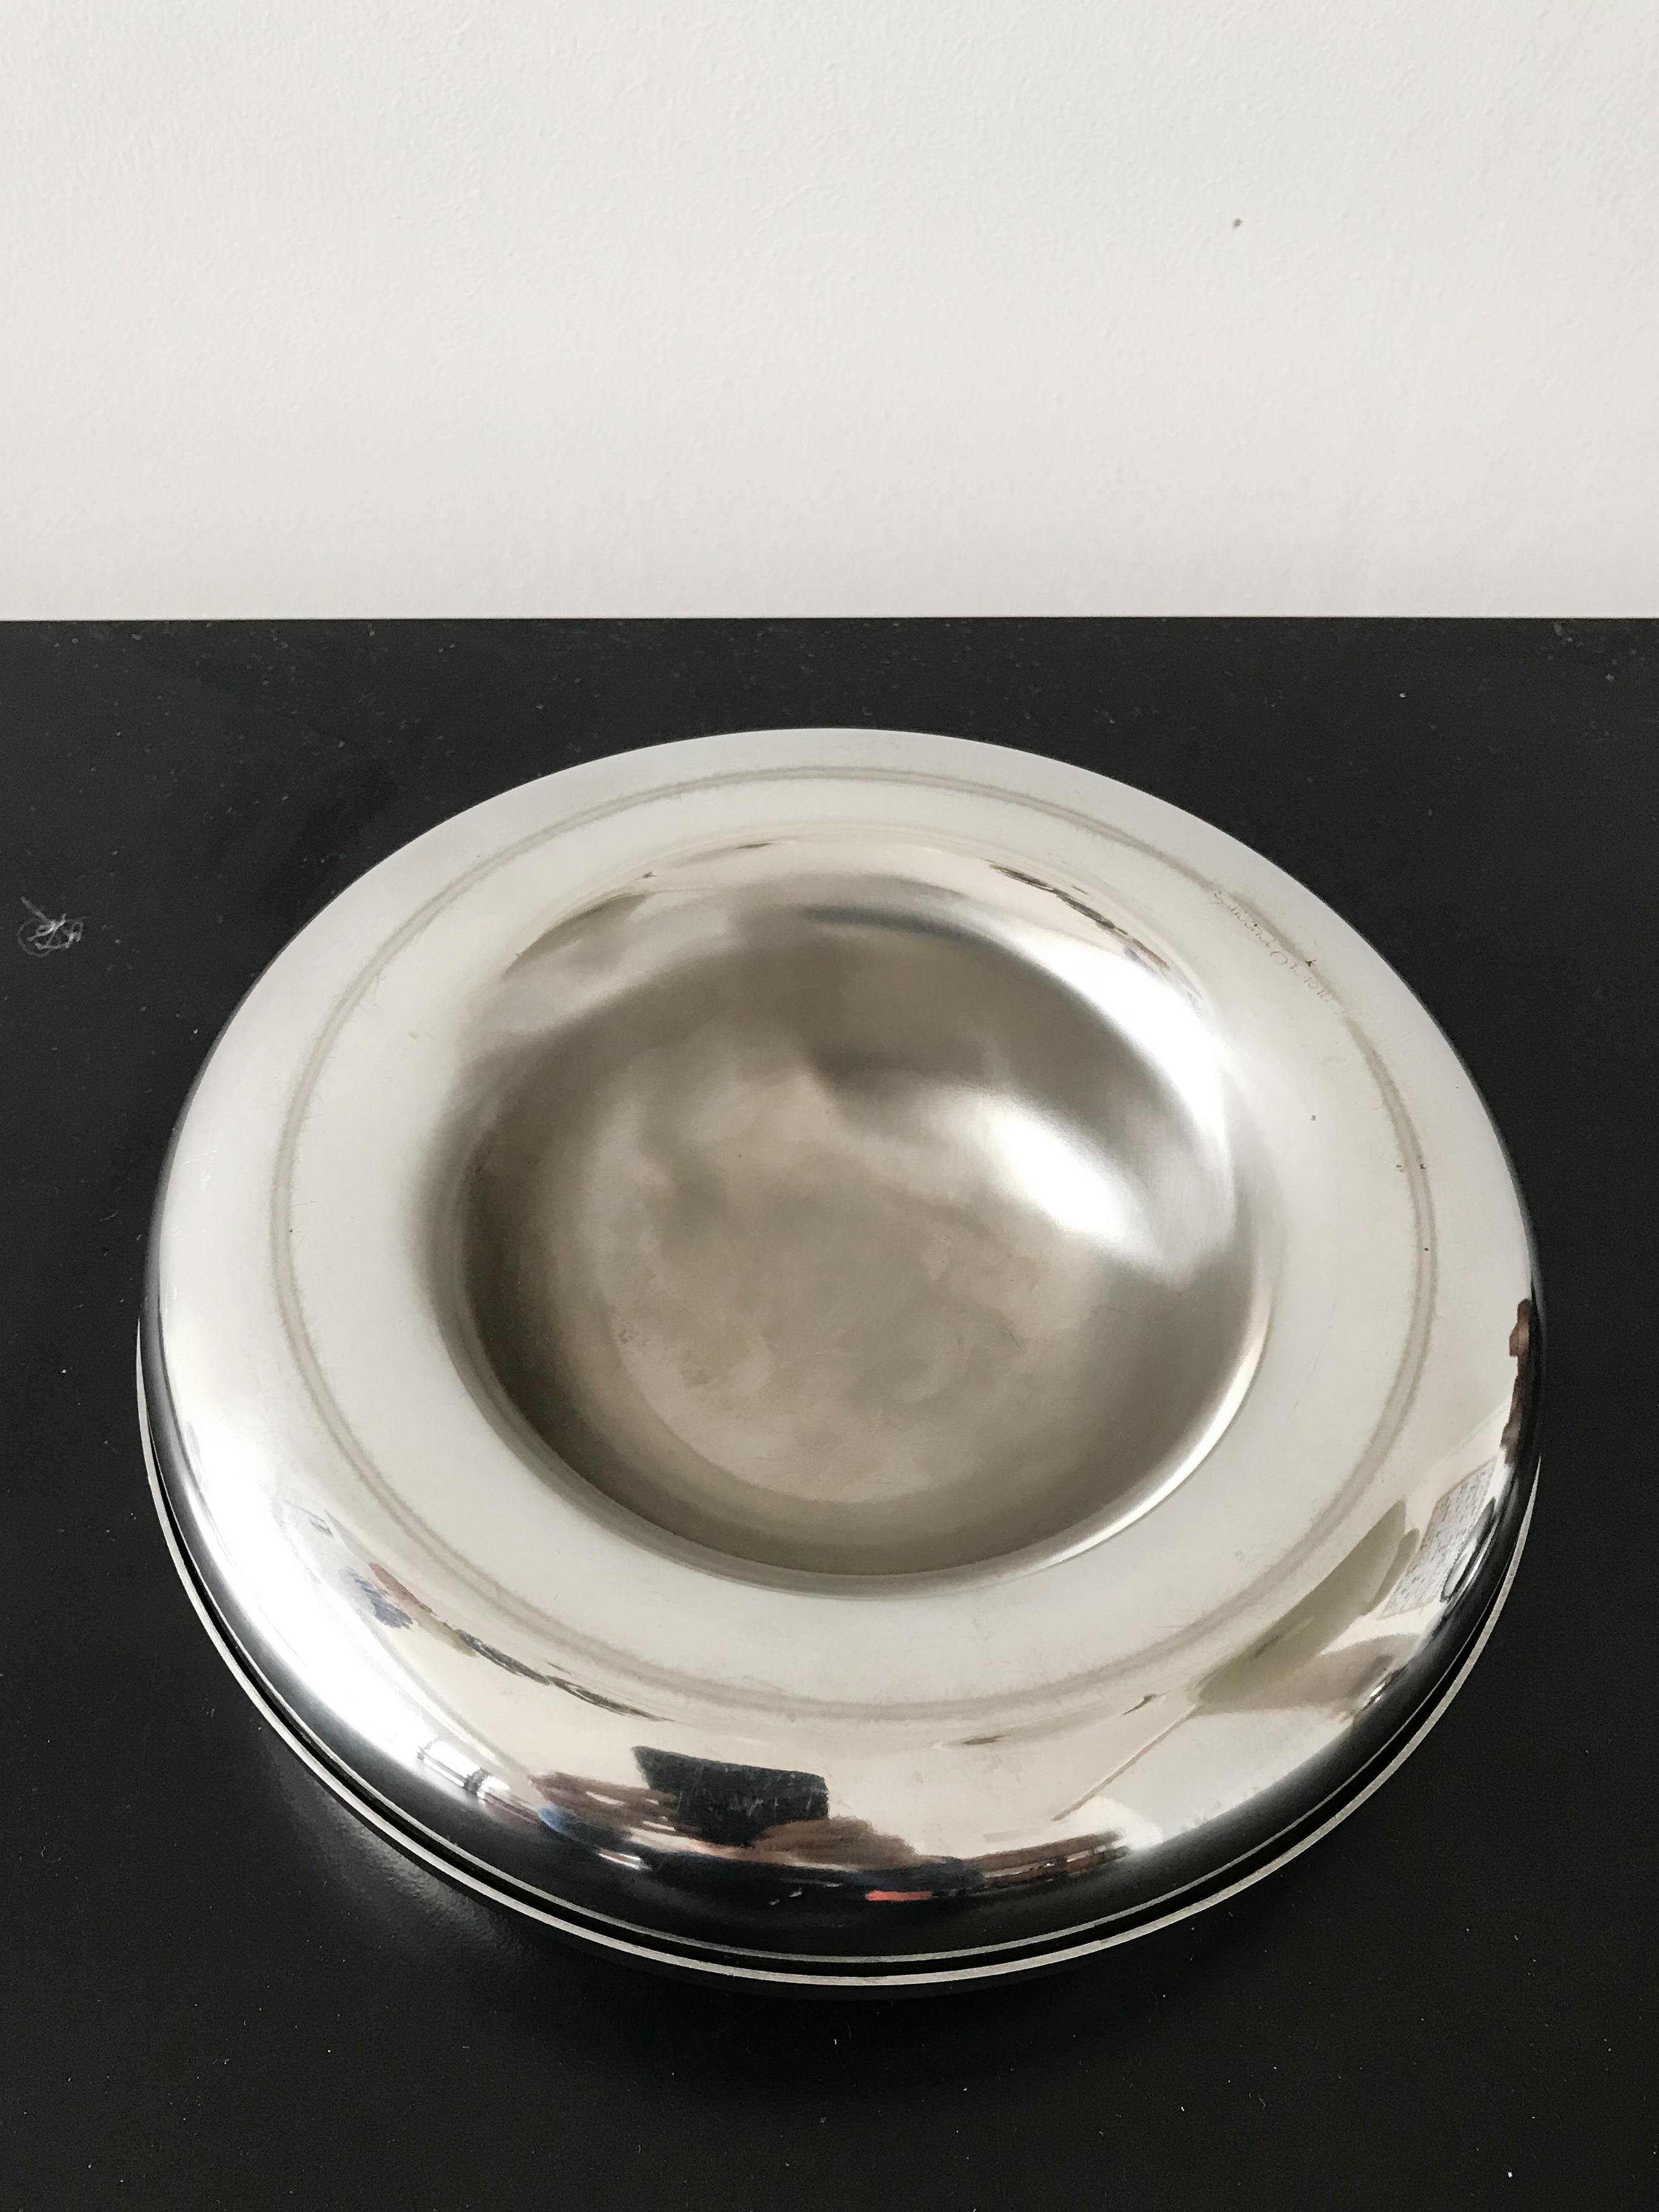 Italian steel ashtray manufactured by Sambonet with engraved trademark, Italy 1970s
Please note that the item is original of the period and this shows normal signs of age and use.